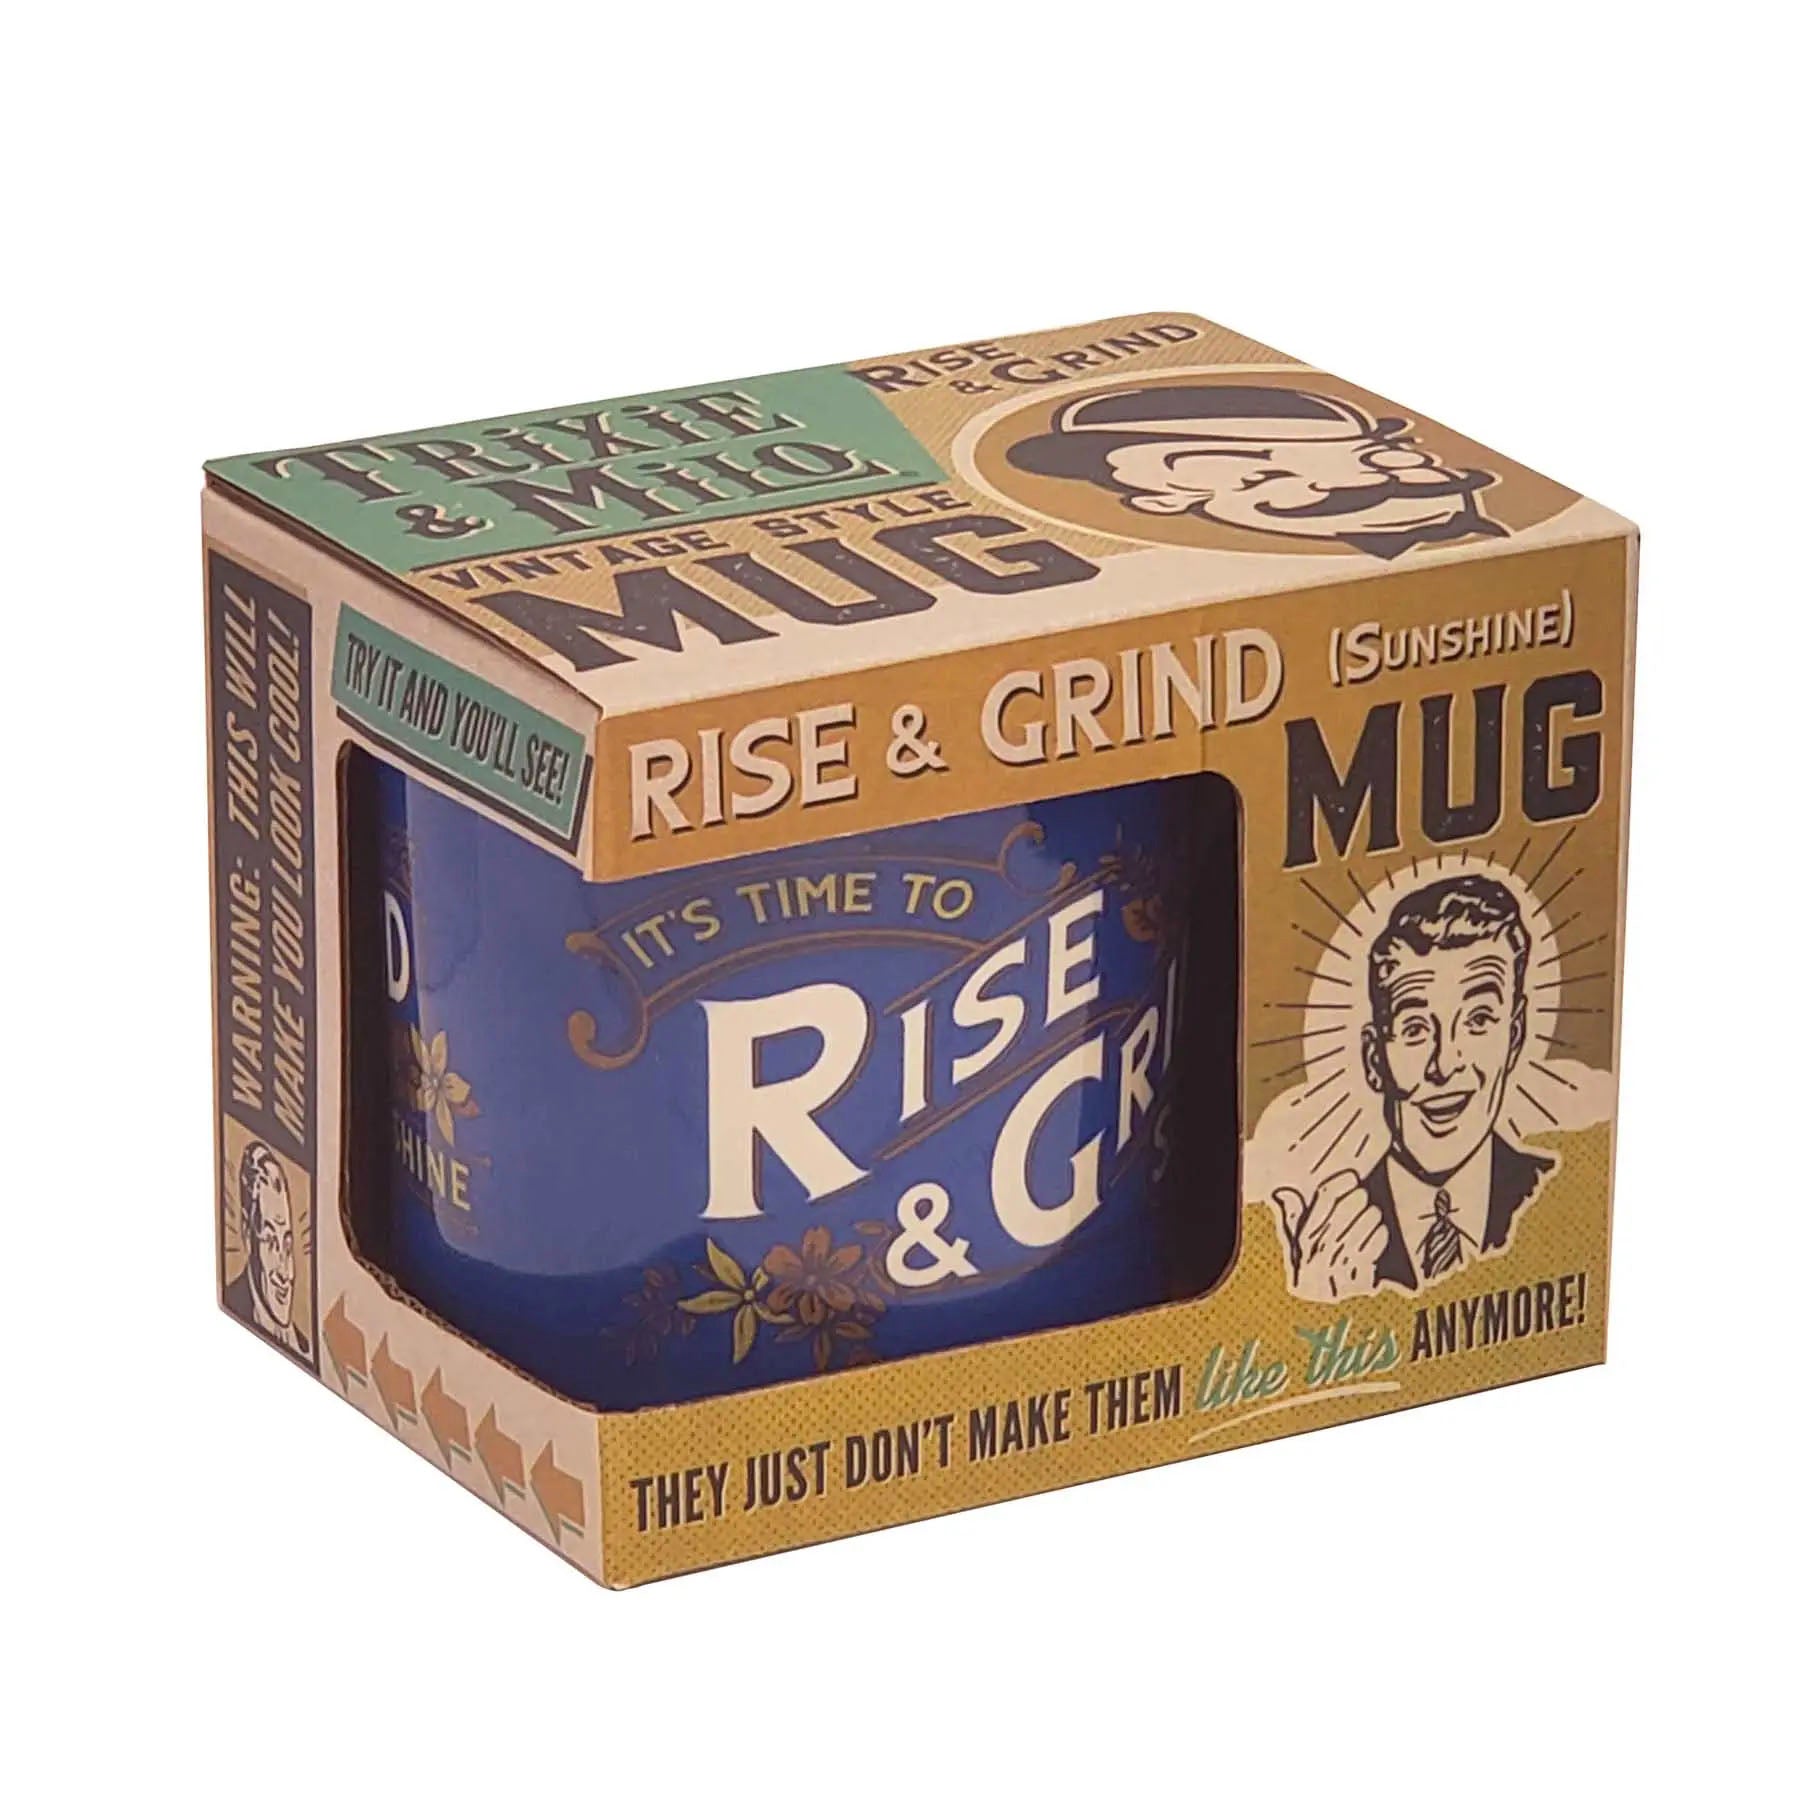 ceramic tea or coffee mug. cafe cup reads "Rise and Grind" in bright blue, white, tan and beige retro vintage style presented with kitschy gift box